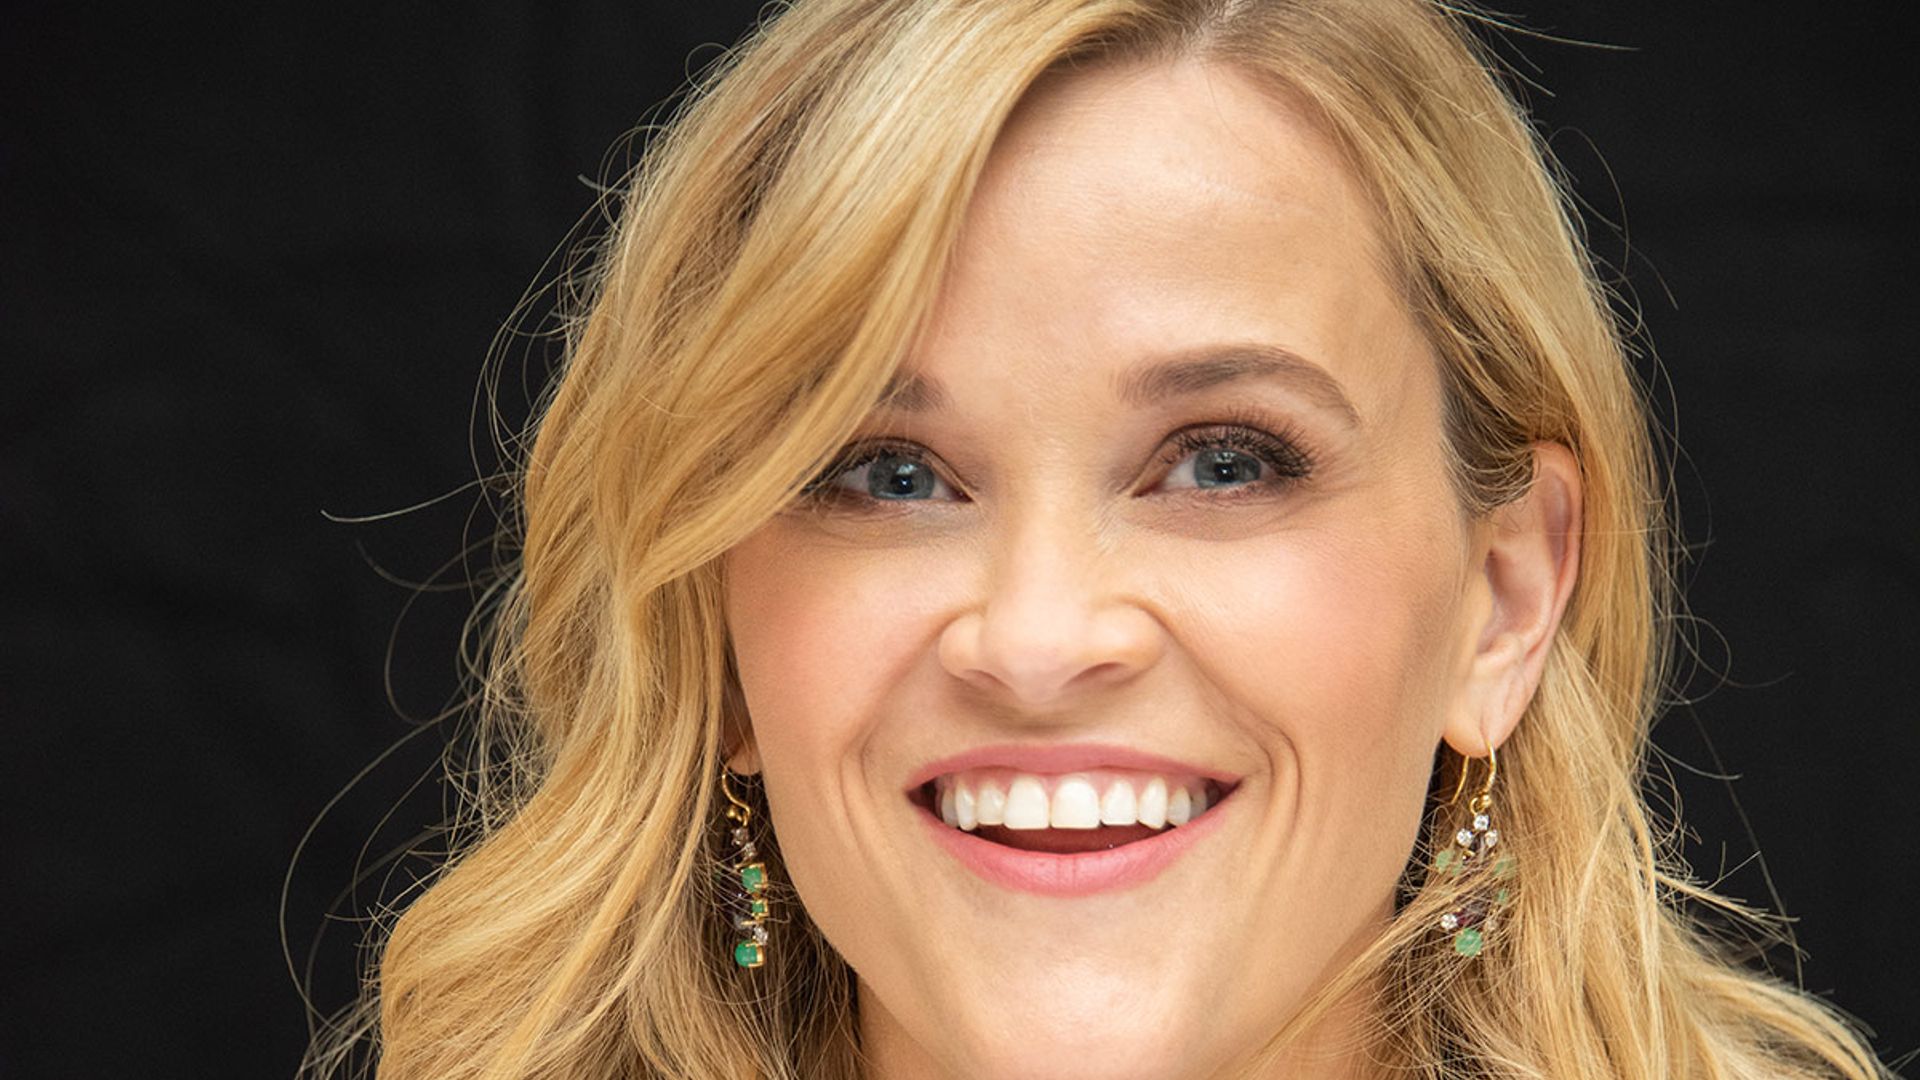 Reese Witherspoon shares never-before-seen-photo with Little Big Lies co-stars